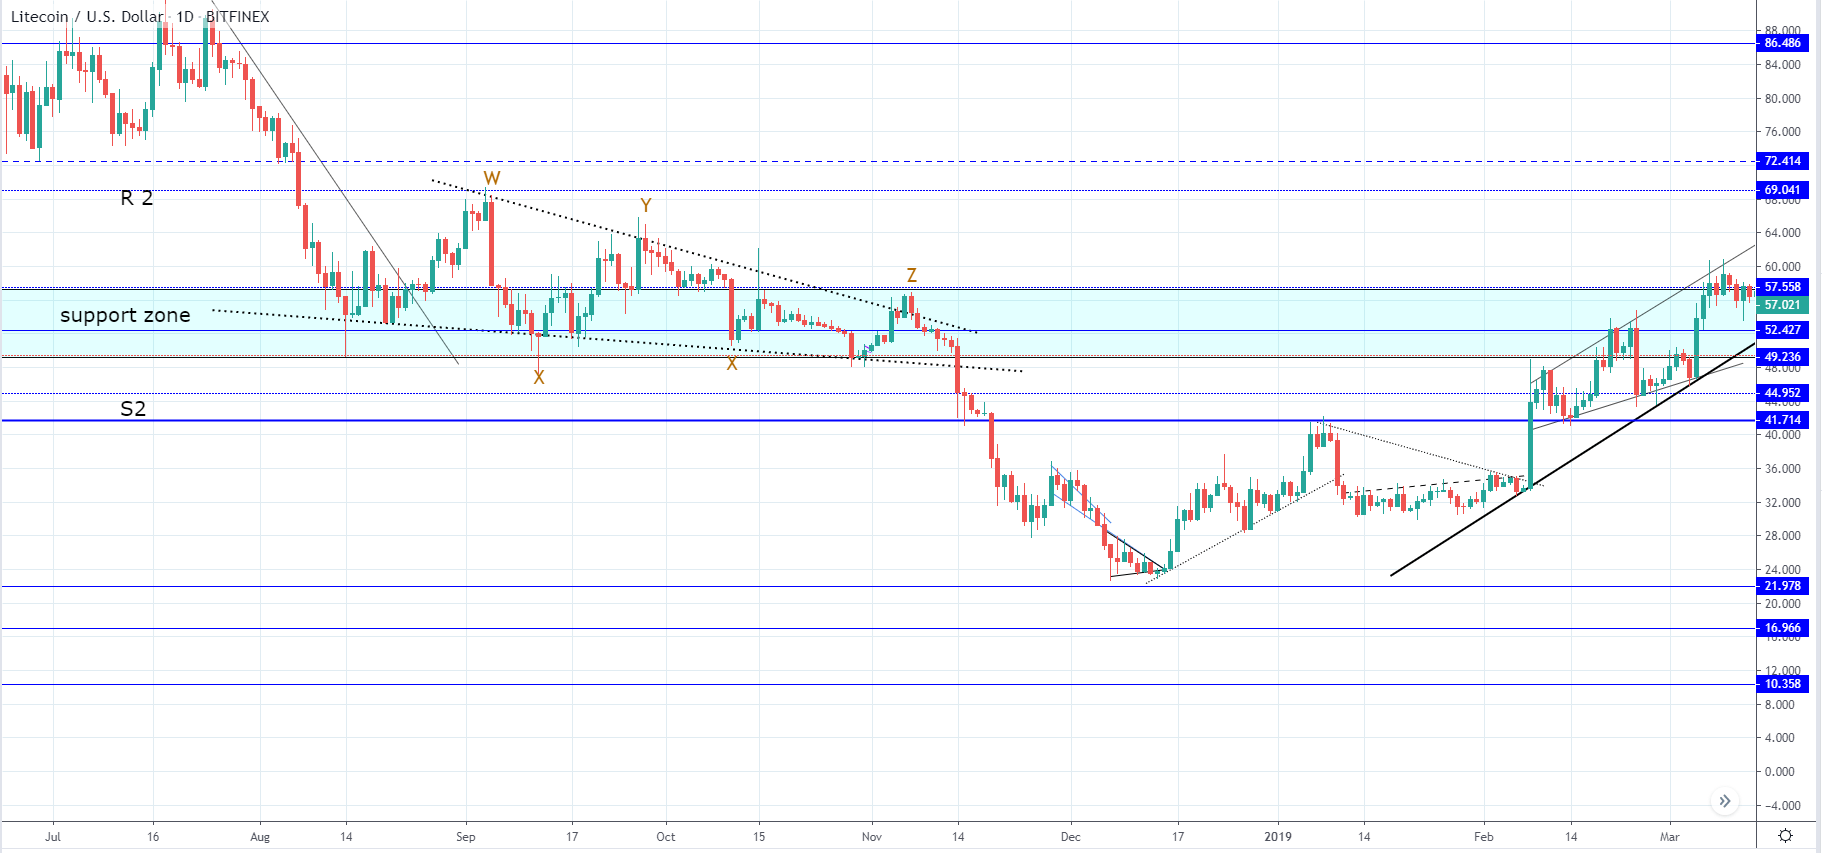 LTC and EOS - Further lows are expected